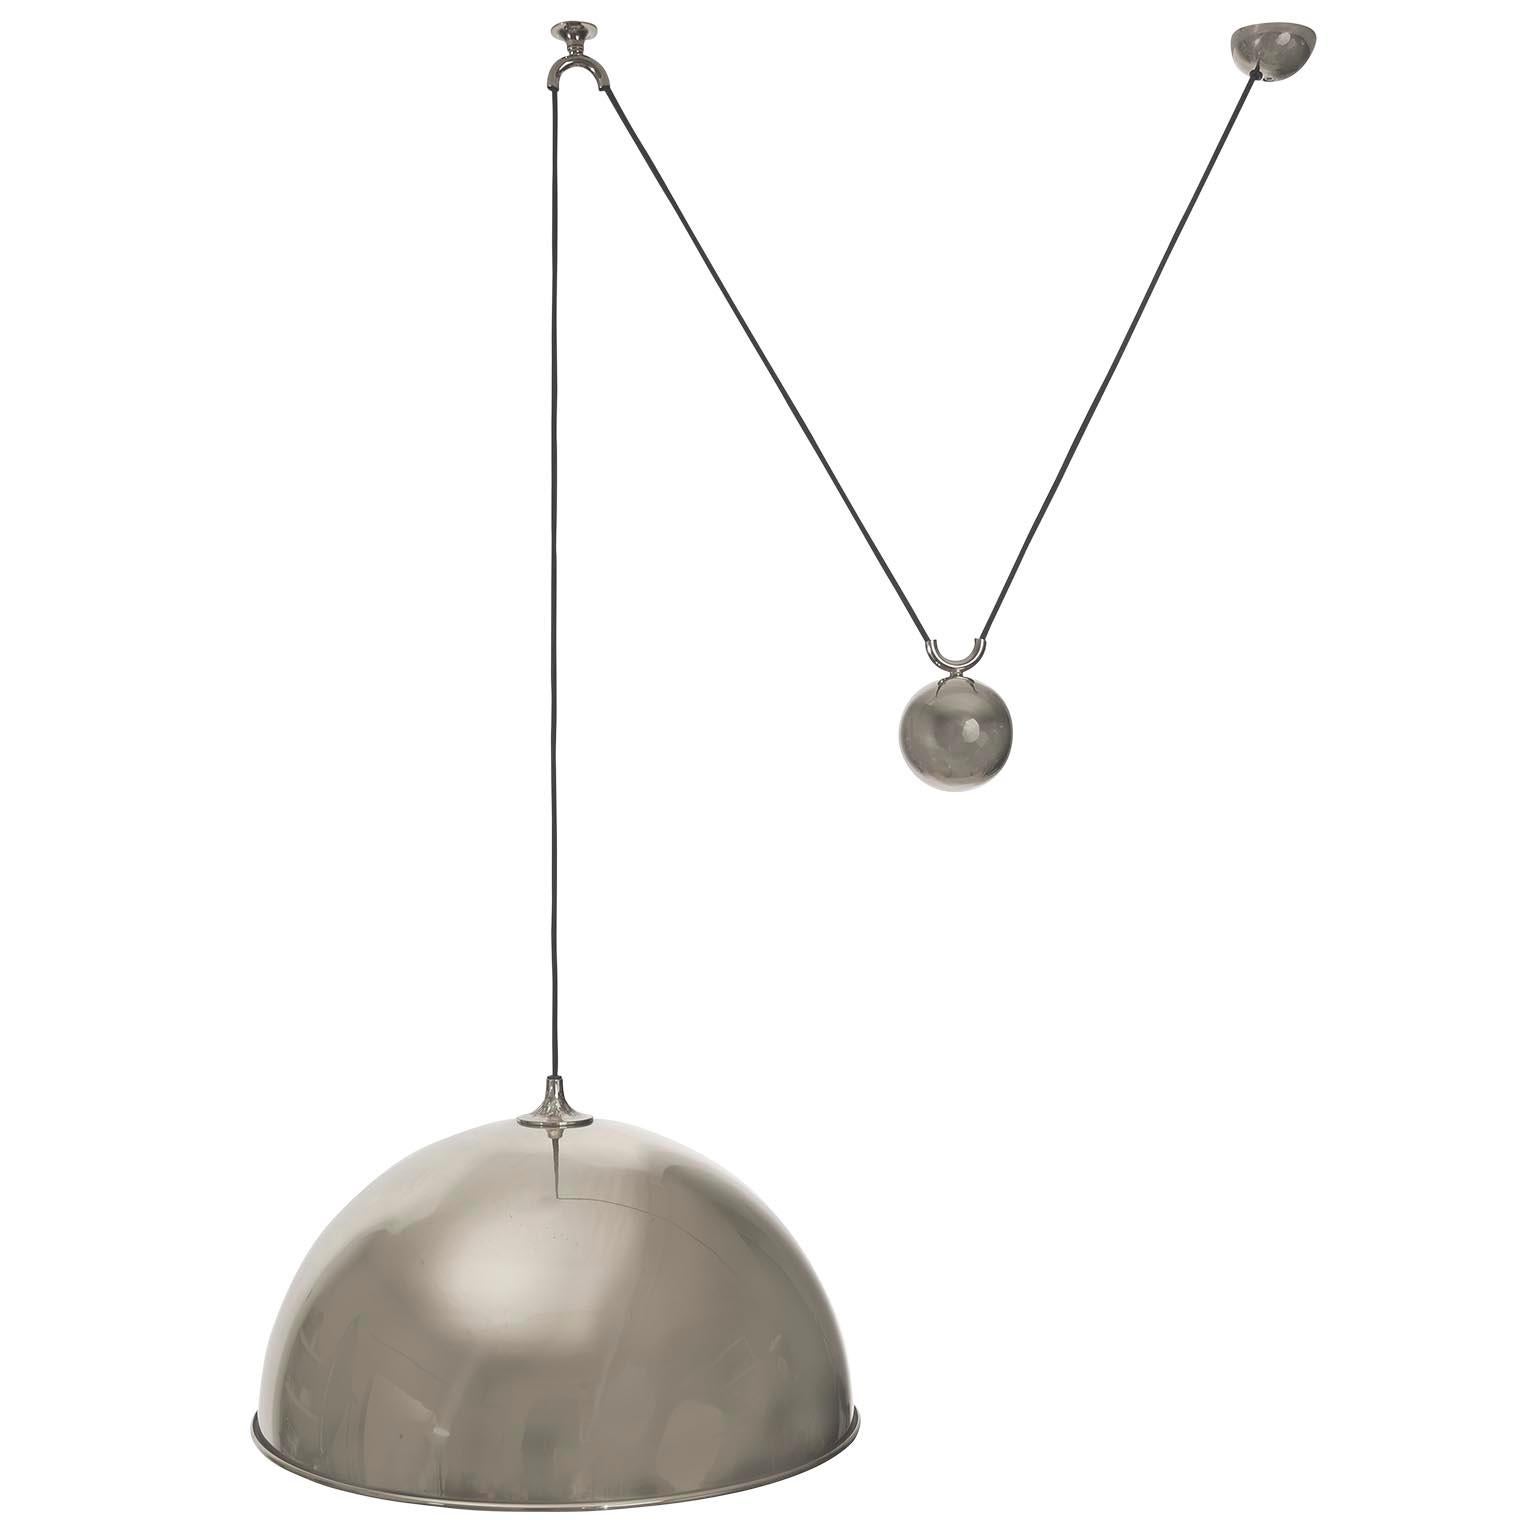 A height adjustable counterbalance pendant lamp by Florian Schulz, Germany, manufactured in midcentury, circa 1970 (late 1960s-early 1970s).
The fixture is made of nickel plated solid brass. The naturally aged nickel has got patina and become matte